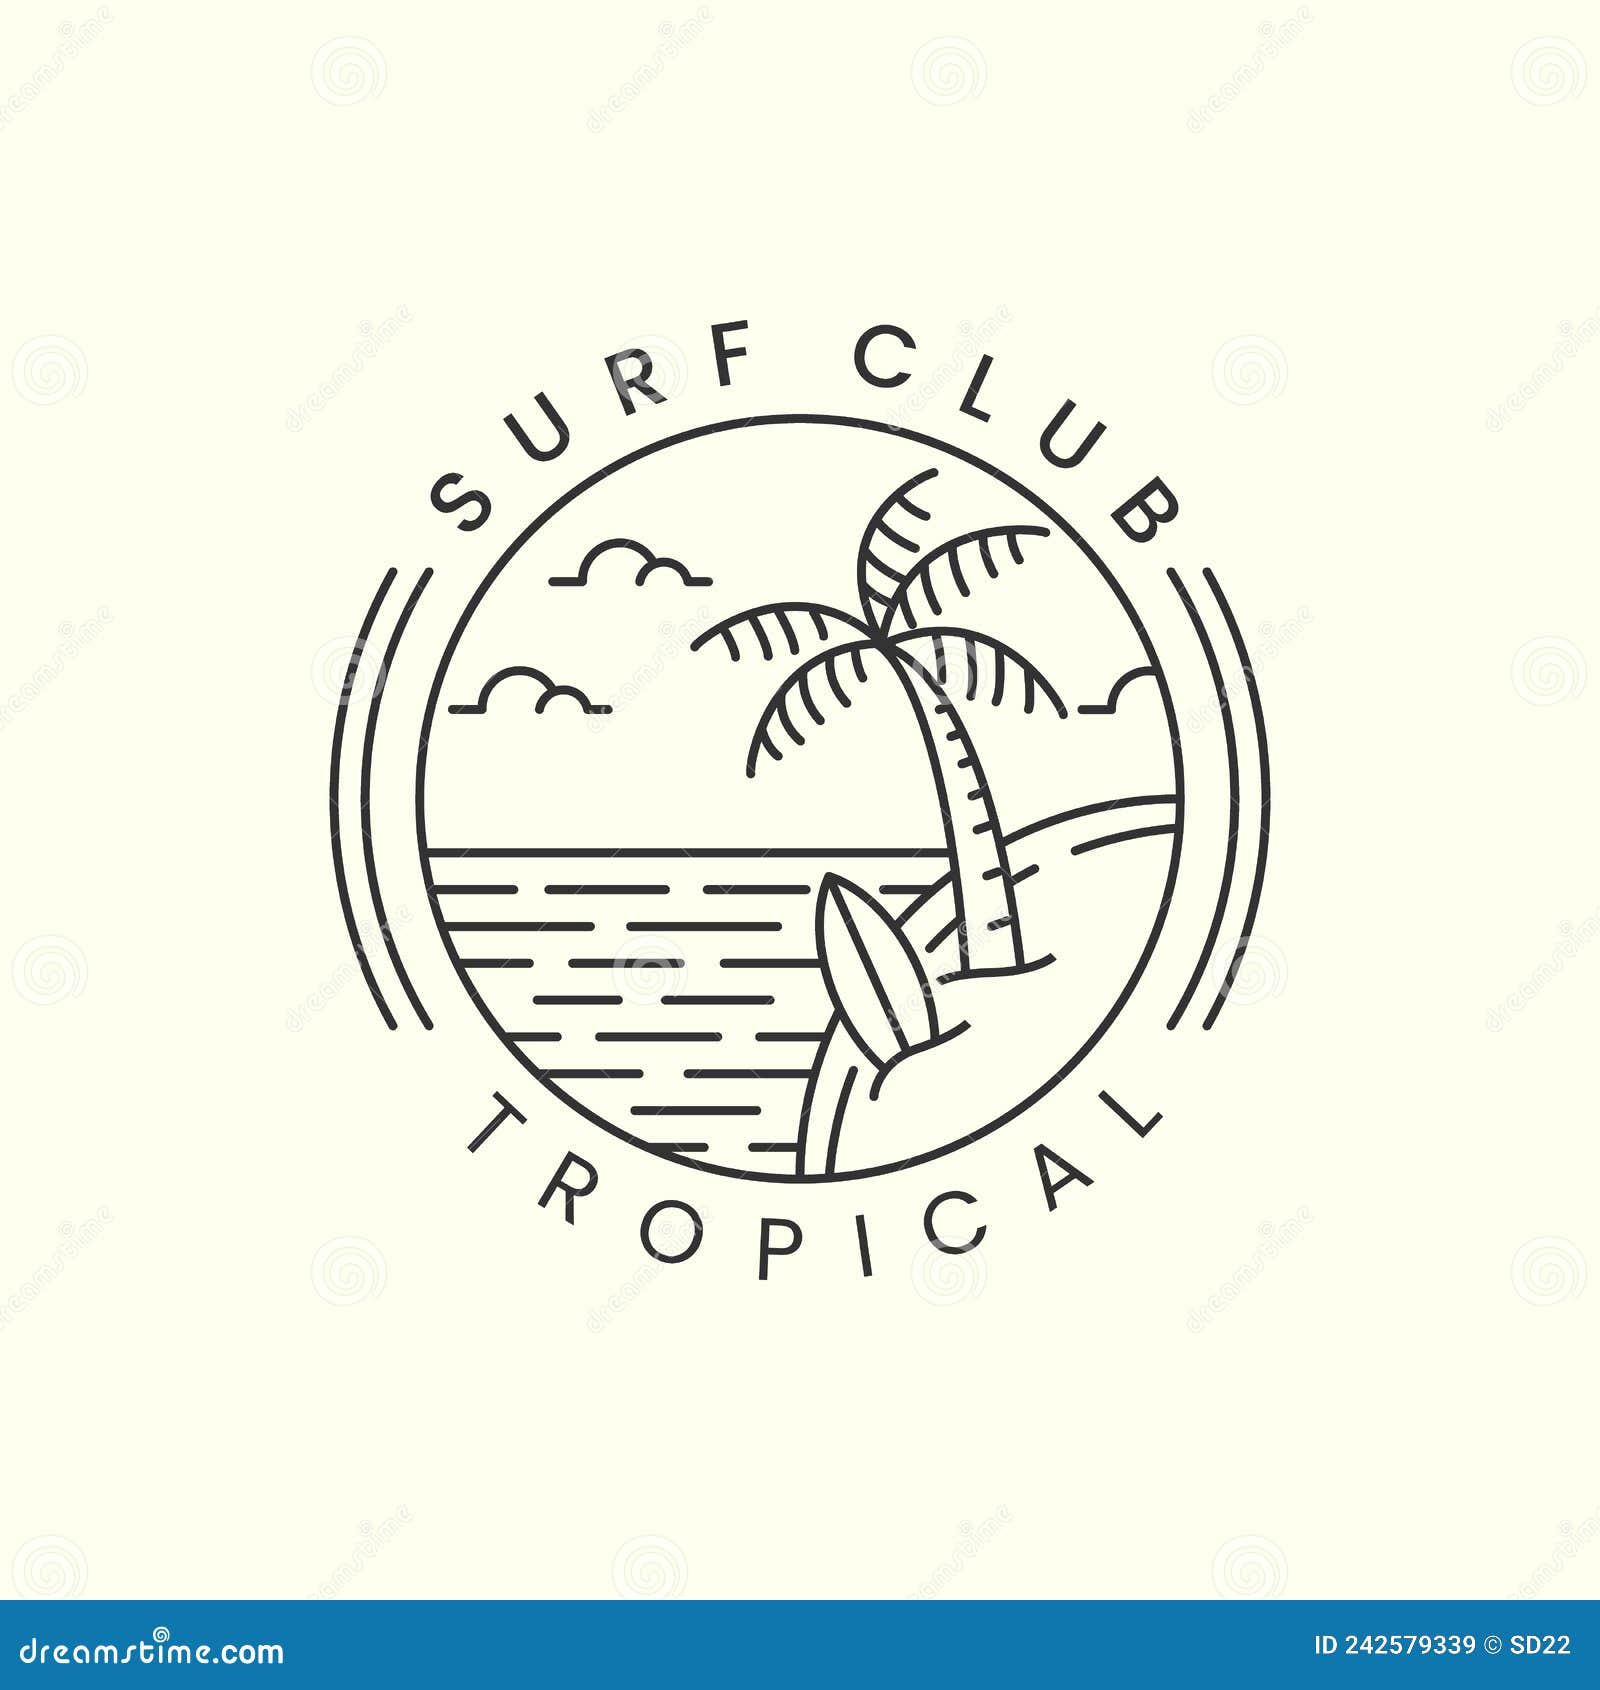 Surf Club Tropical Beach with Emblem and Line Art Style Logo Icon ...